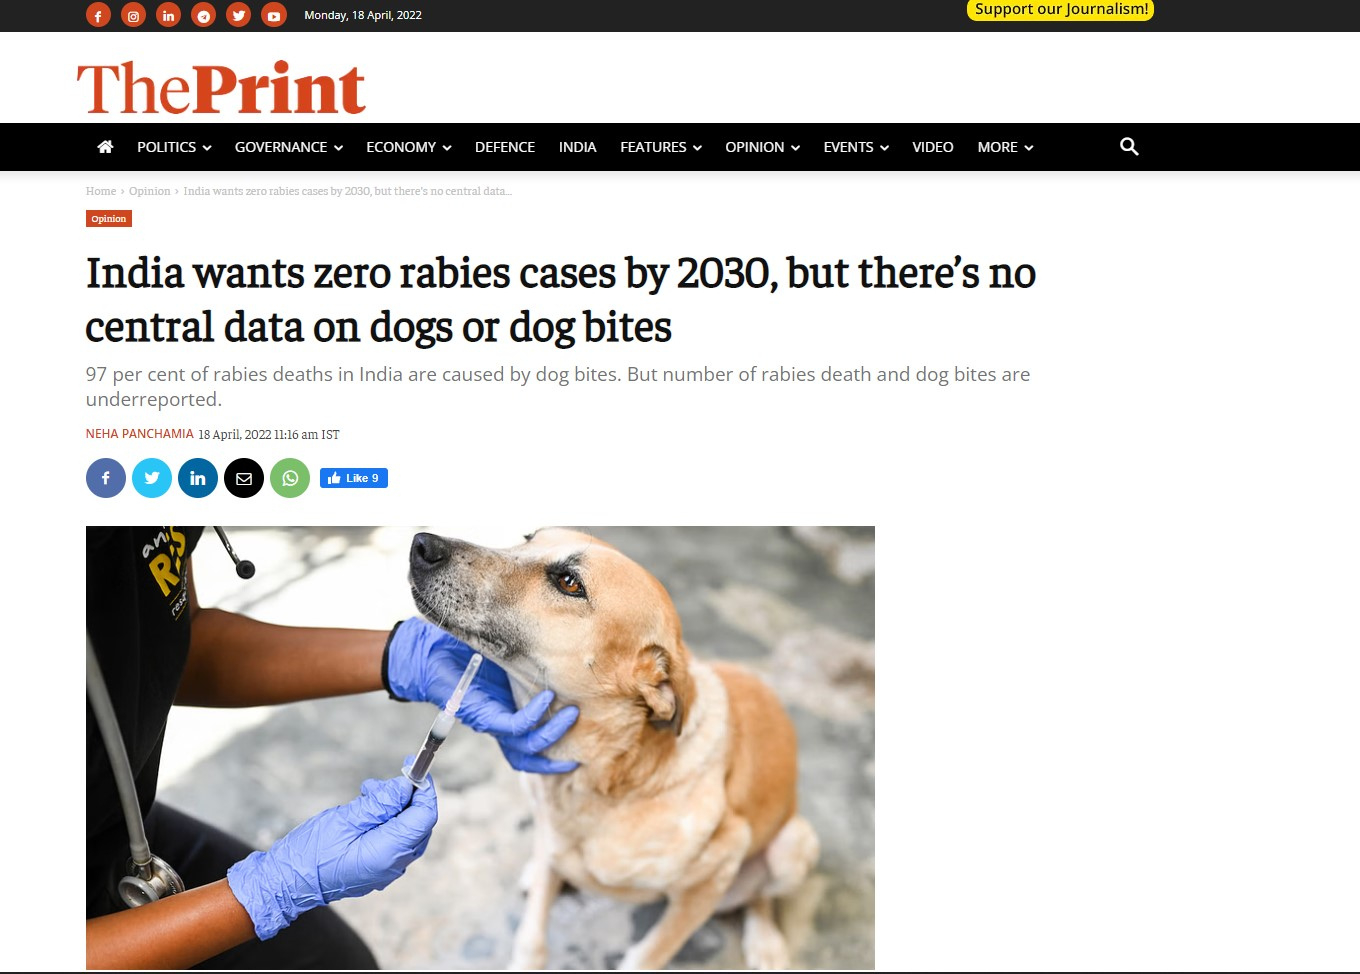 India wants zero rabies cases by 2030, but there's no central data on dogs  or dog bites - RESQ Charitable Trust